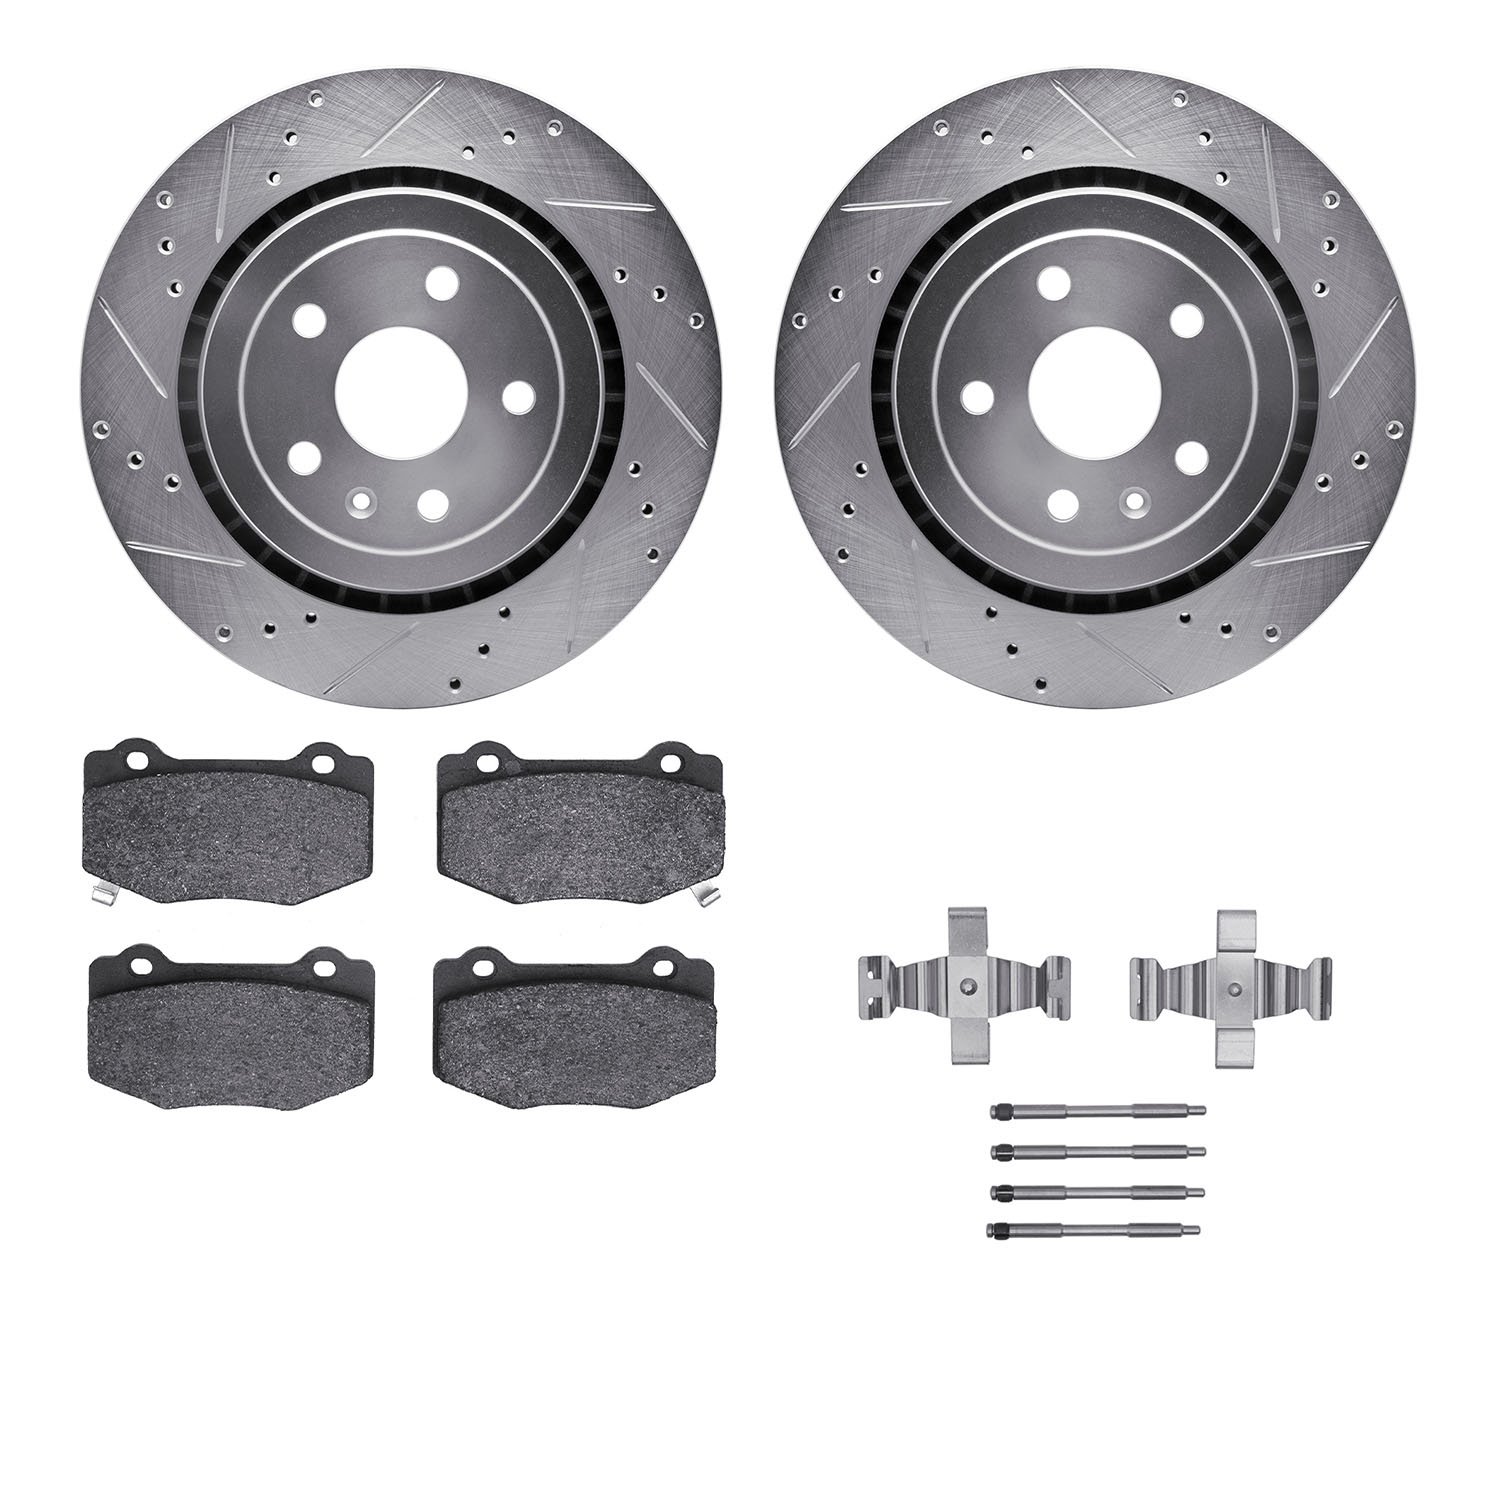 7312-47068 Drilled/Slotted Brake Rotor with 3000-Series Ceramic Brake Pads Kit & Hardware [Silver], Fits Select GM, Position: Re